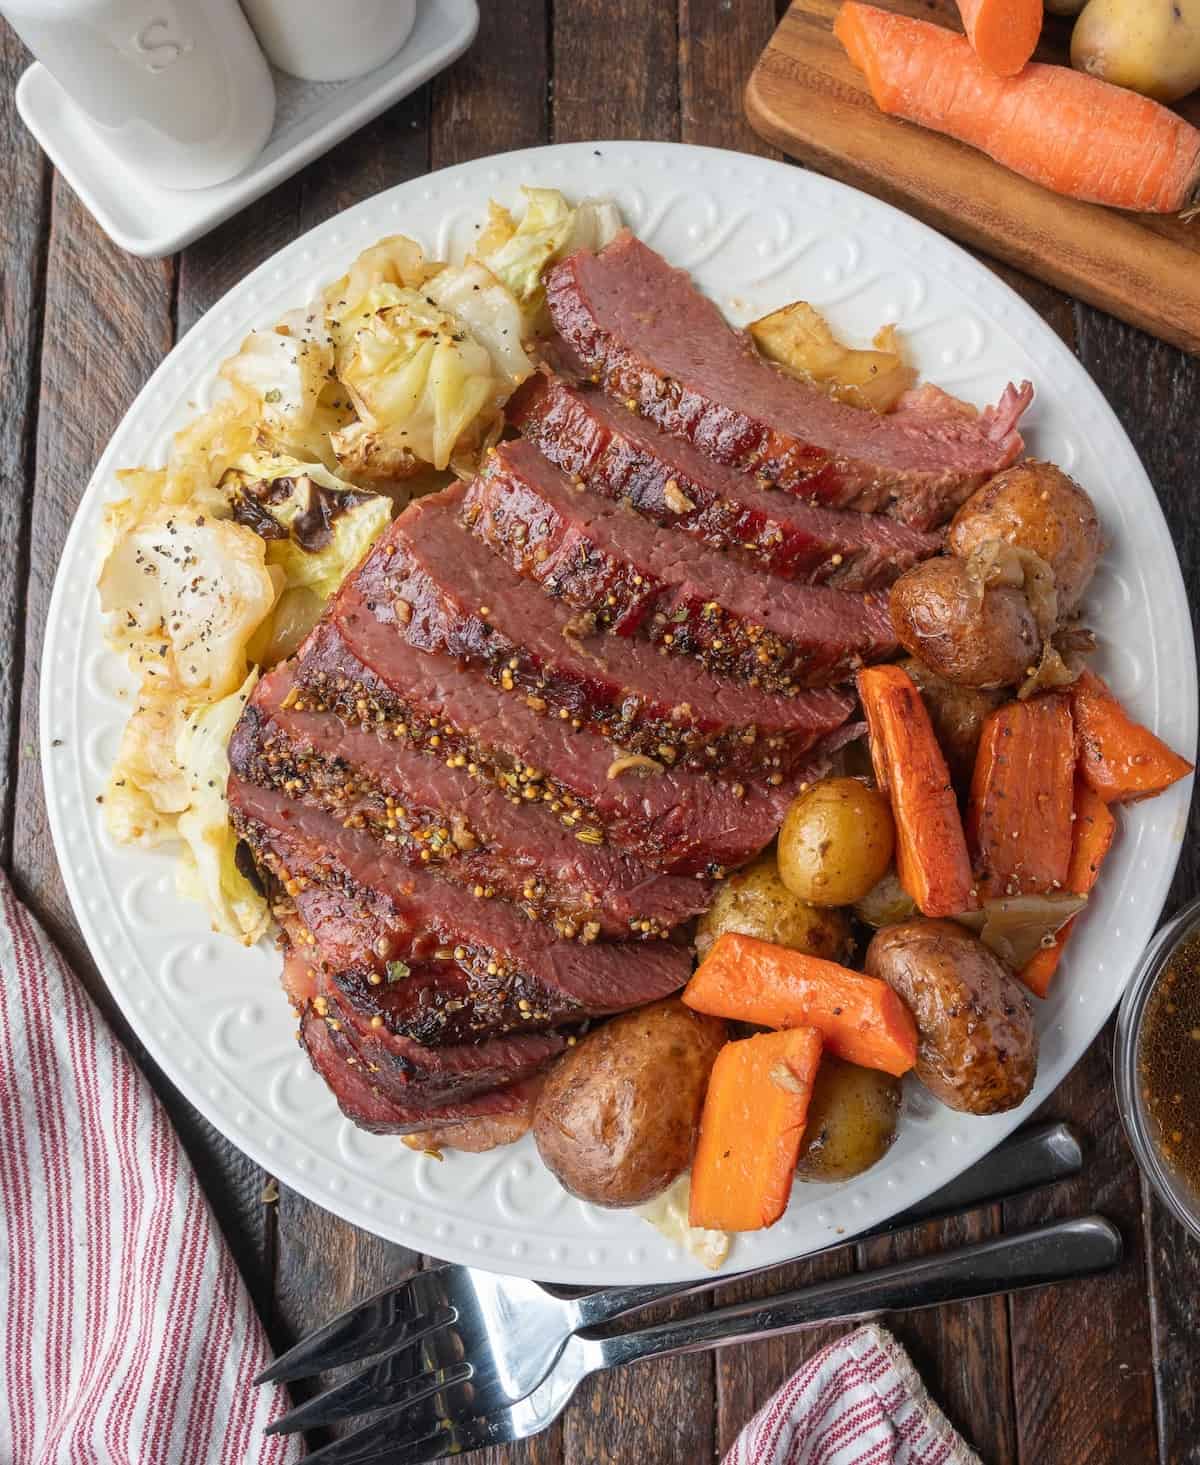 Corned beef slices on a platter with vegetables.